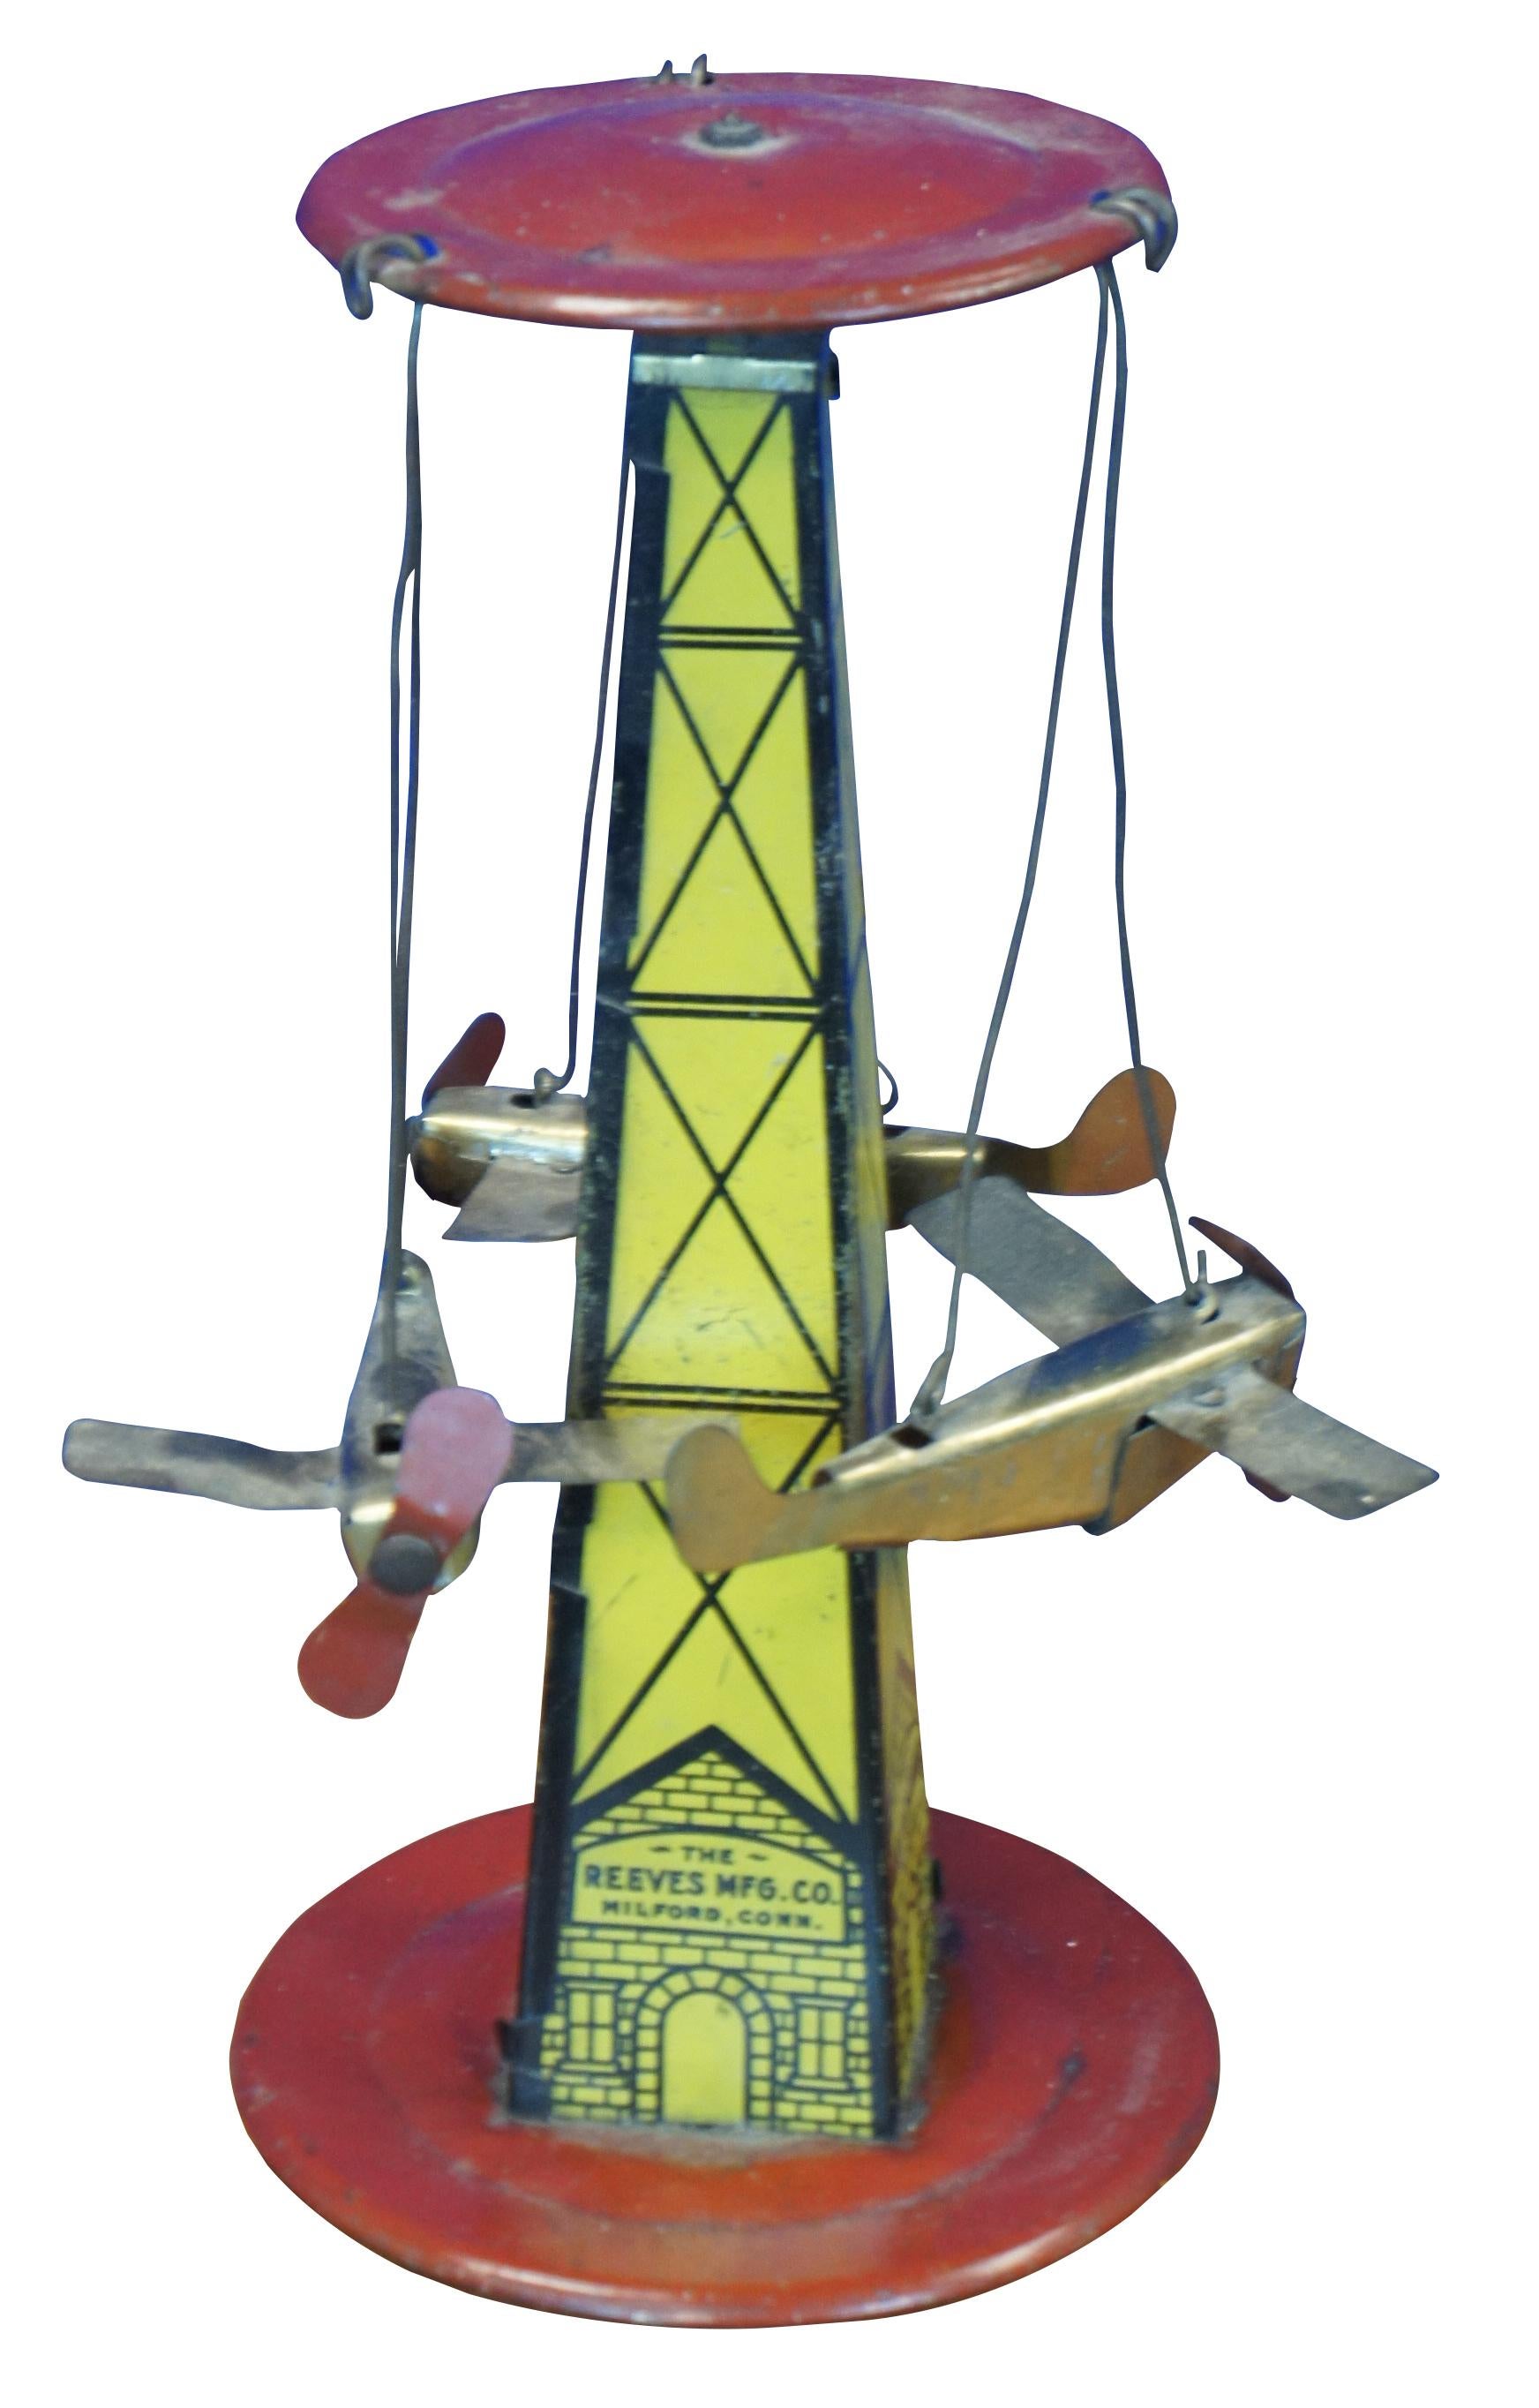 Industrial 1920s Antique Reeves Mfg Air E Go Round Tin Litho Windup Flying Airplane Toy